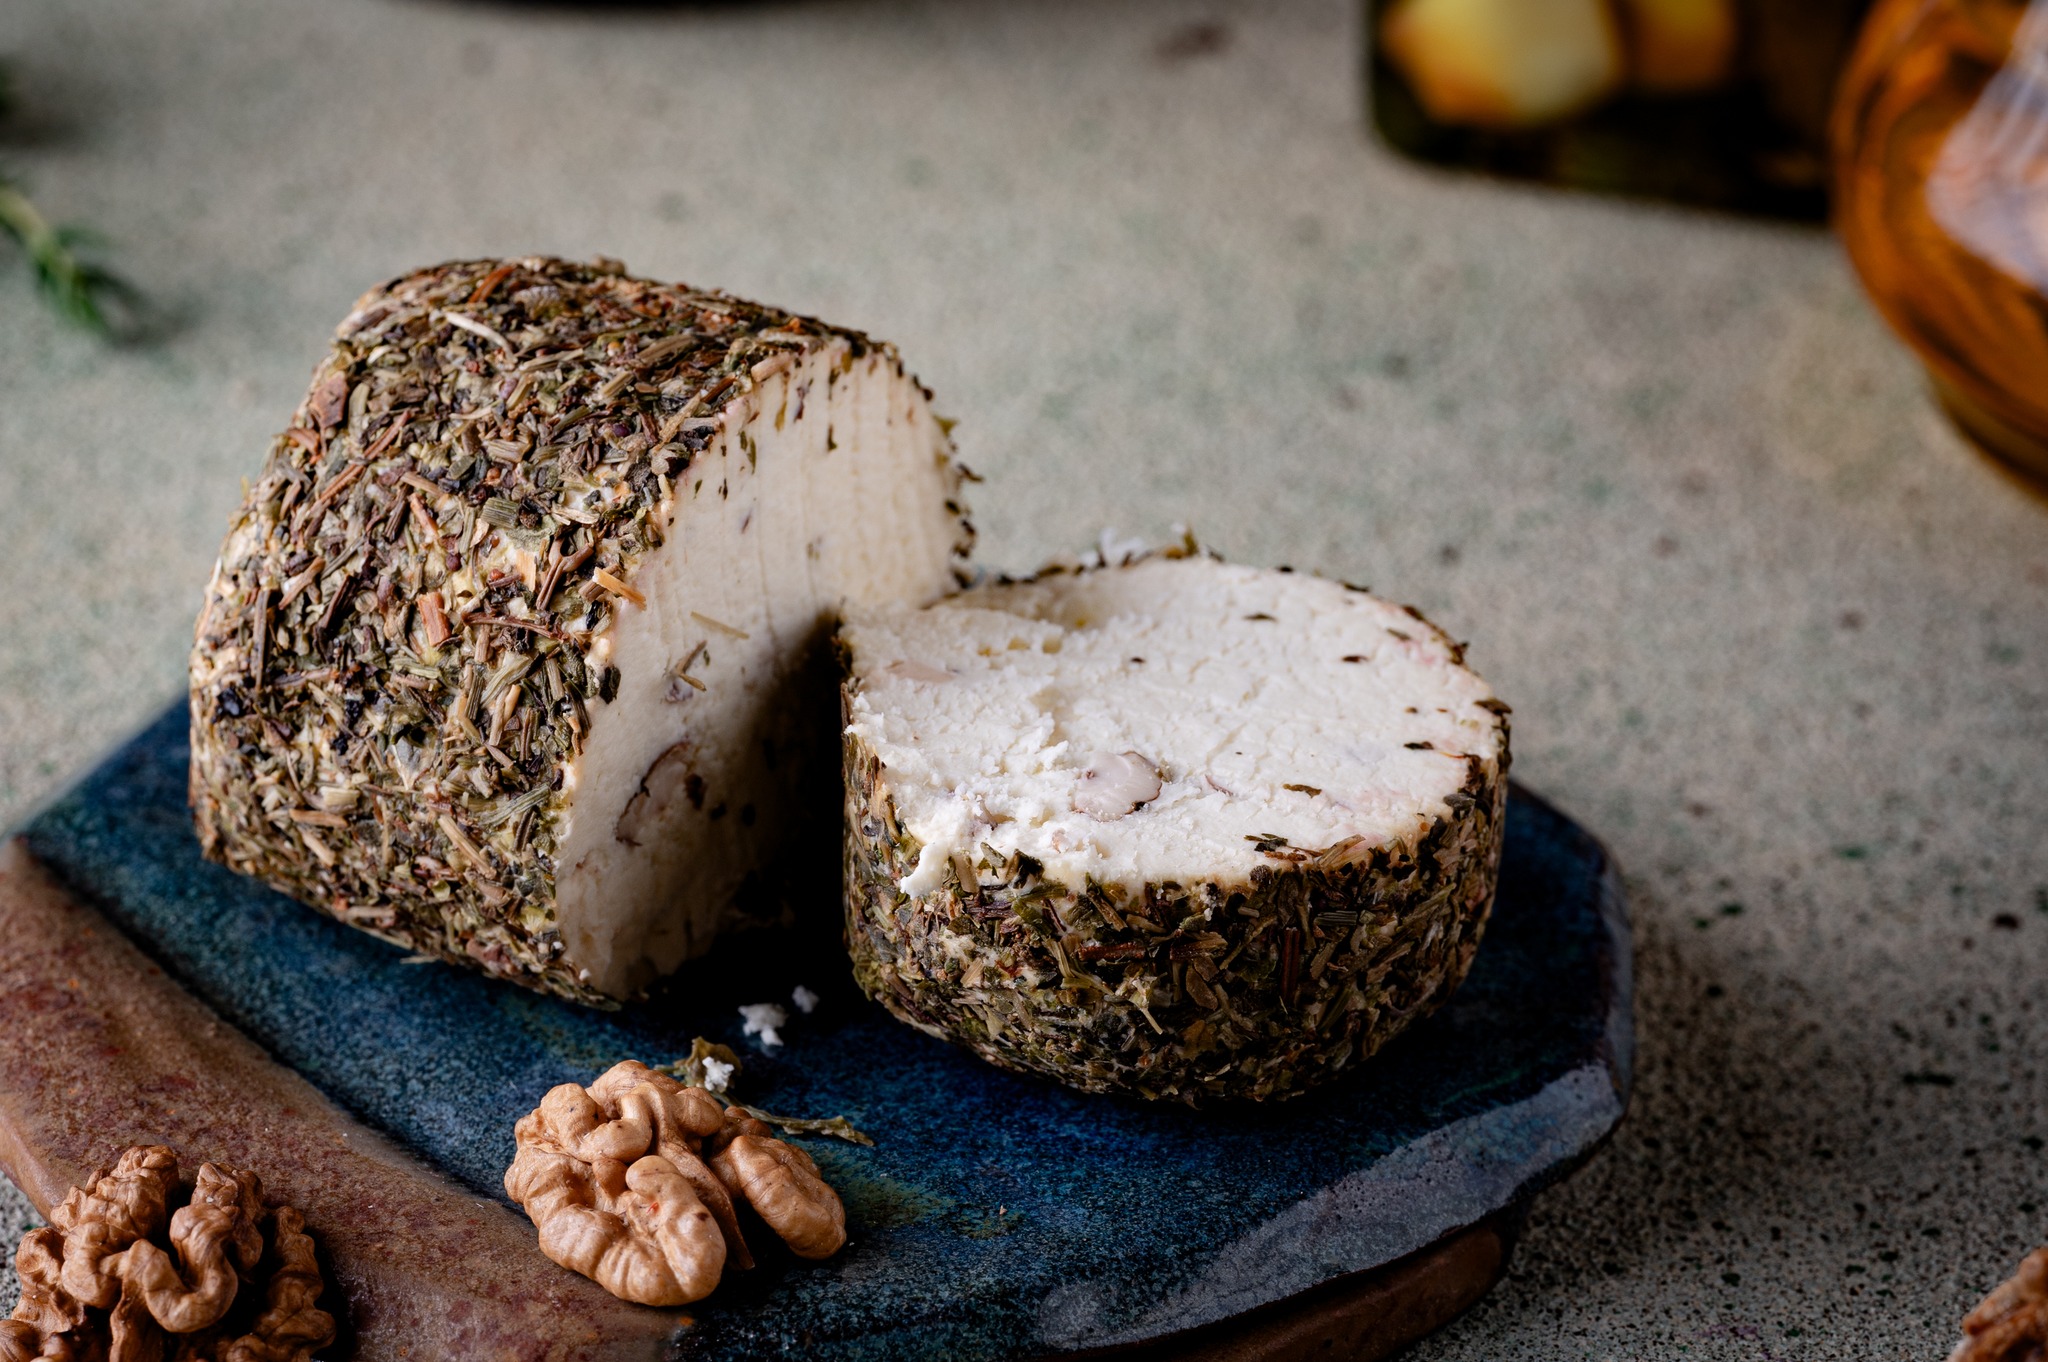 Craft cheese makers focus on the domestic market